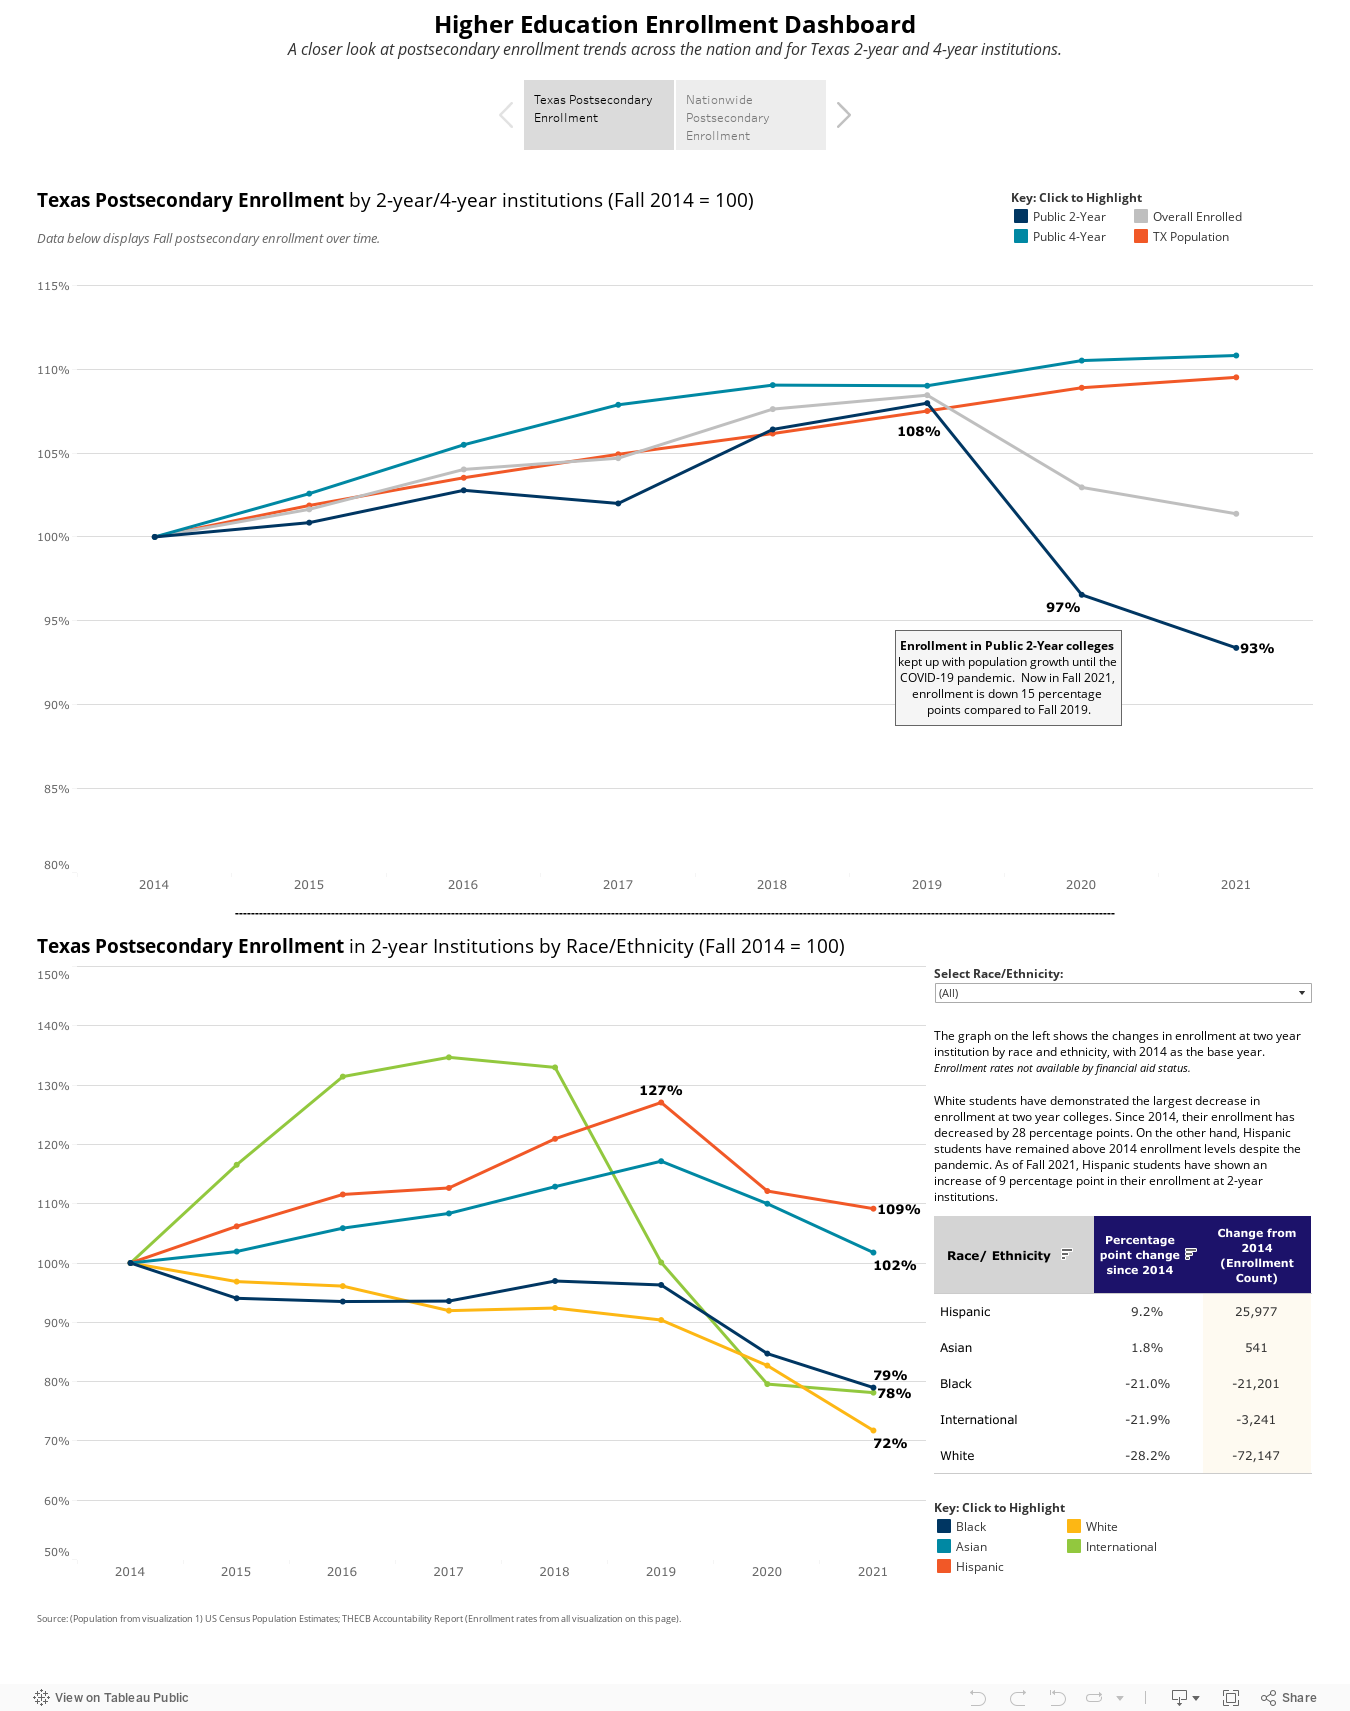 Higher Education Enrollment DashboardA closer look at postsecondary enrollment trends across the nation and for Texas 2-year and 4-year institutions. 